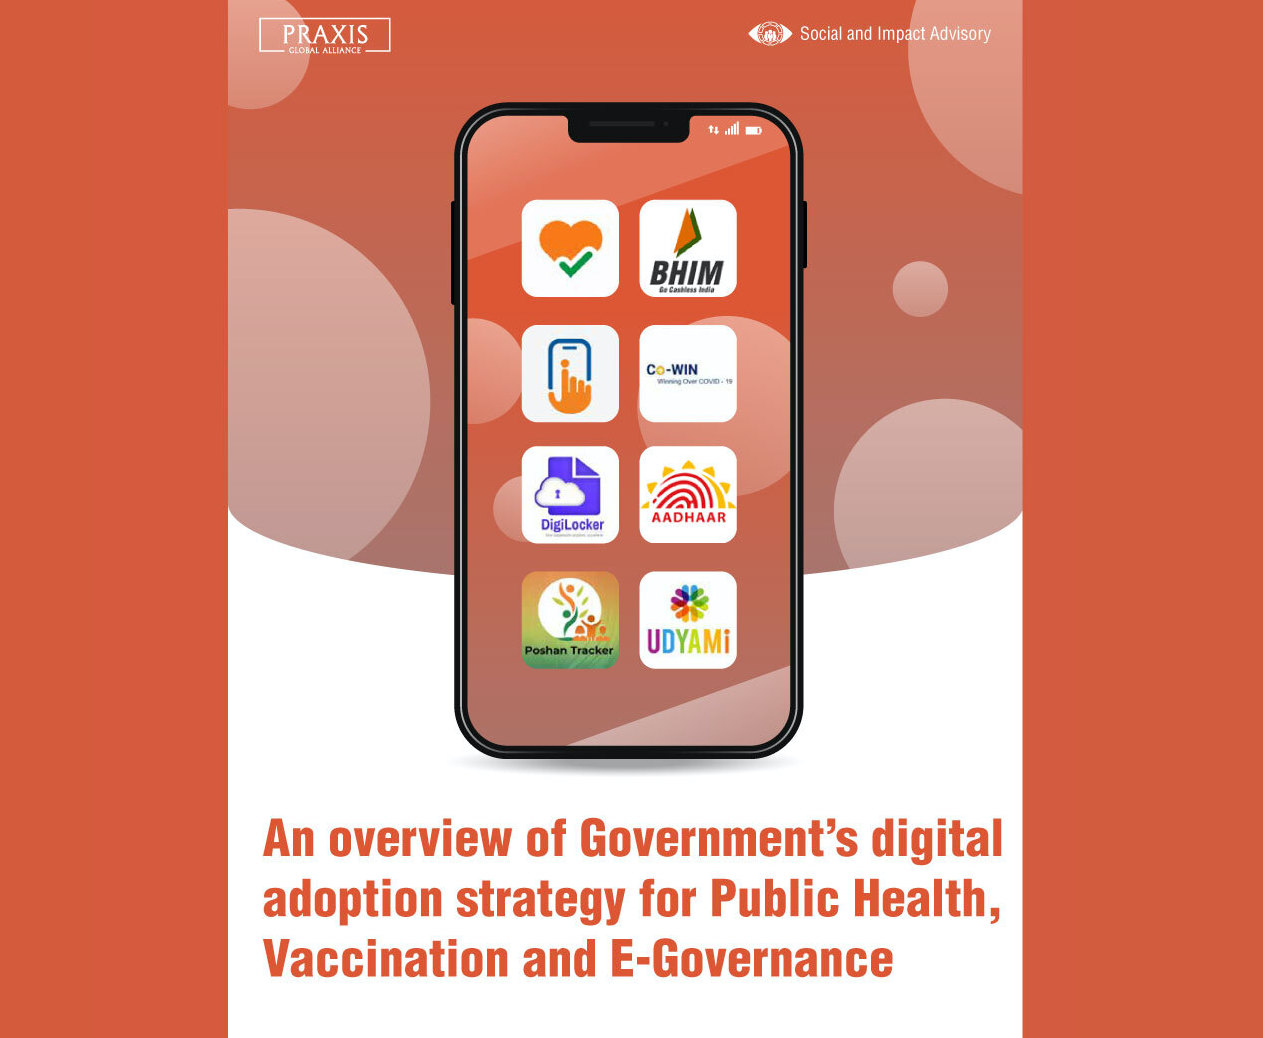 An overview of the Government apps’ progress and demands among the citizen of the country. This whitepaper highlights how Government uses mobile apps primarily for information dissemination, promoting citizen-centric schemes and benefit programs, listening to citizen grievances, and do quick sentiment checks. It also touches upon user concerns and challenges faced while using these apps.